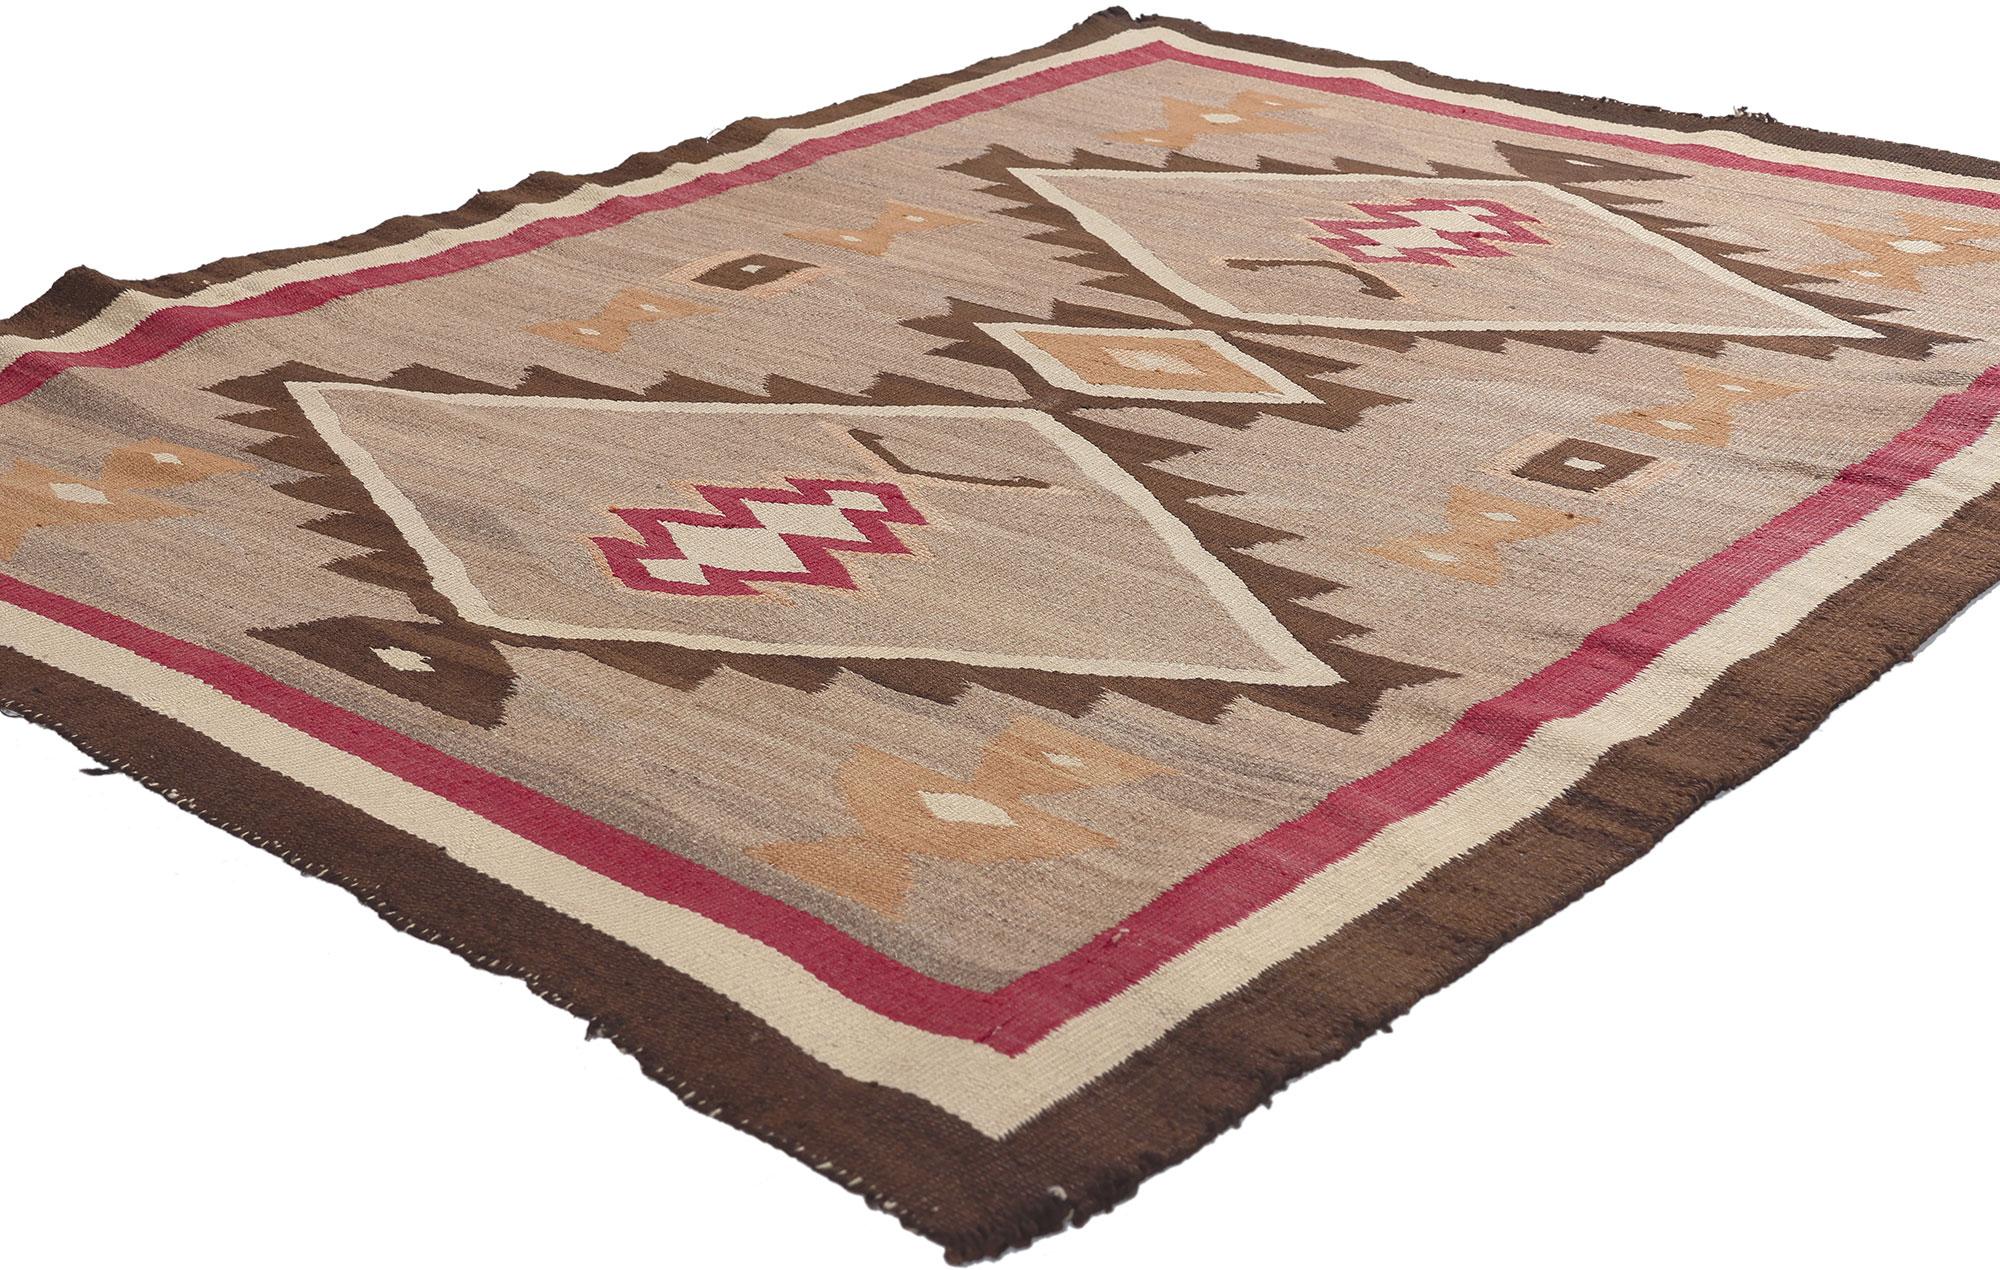 78604 Antique Crystal Navajo Rug, 03'10 x 05'04. 
Southwest style meets Native American in this handwoven Crystal Navajo rug. The distinctive Crystal design and earthy colorway woven into this piece work together creating subtle southwestern appeal.